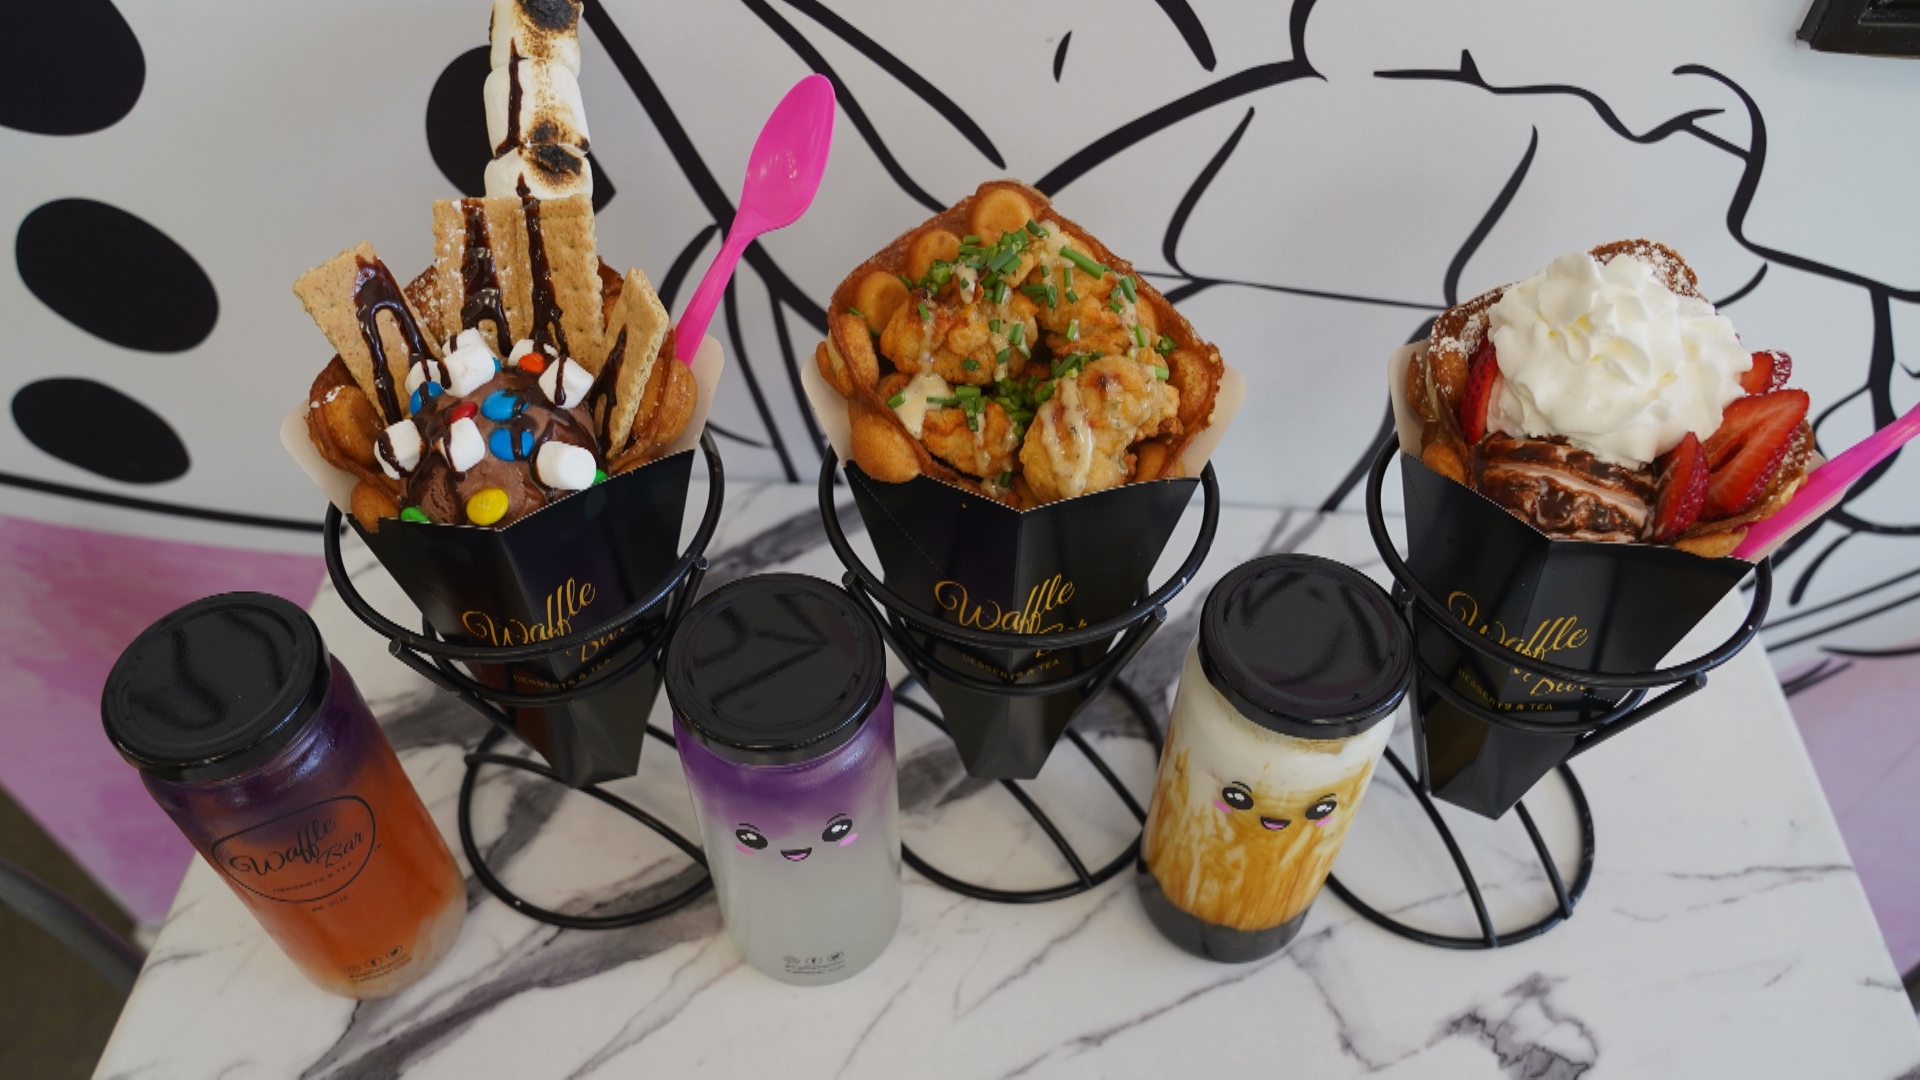 The Waffle Bar in Bloomington will hold its grand opening Saturday morning. The first 50 guests will get a signature bubble waffle for free.